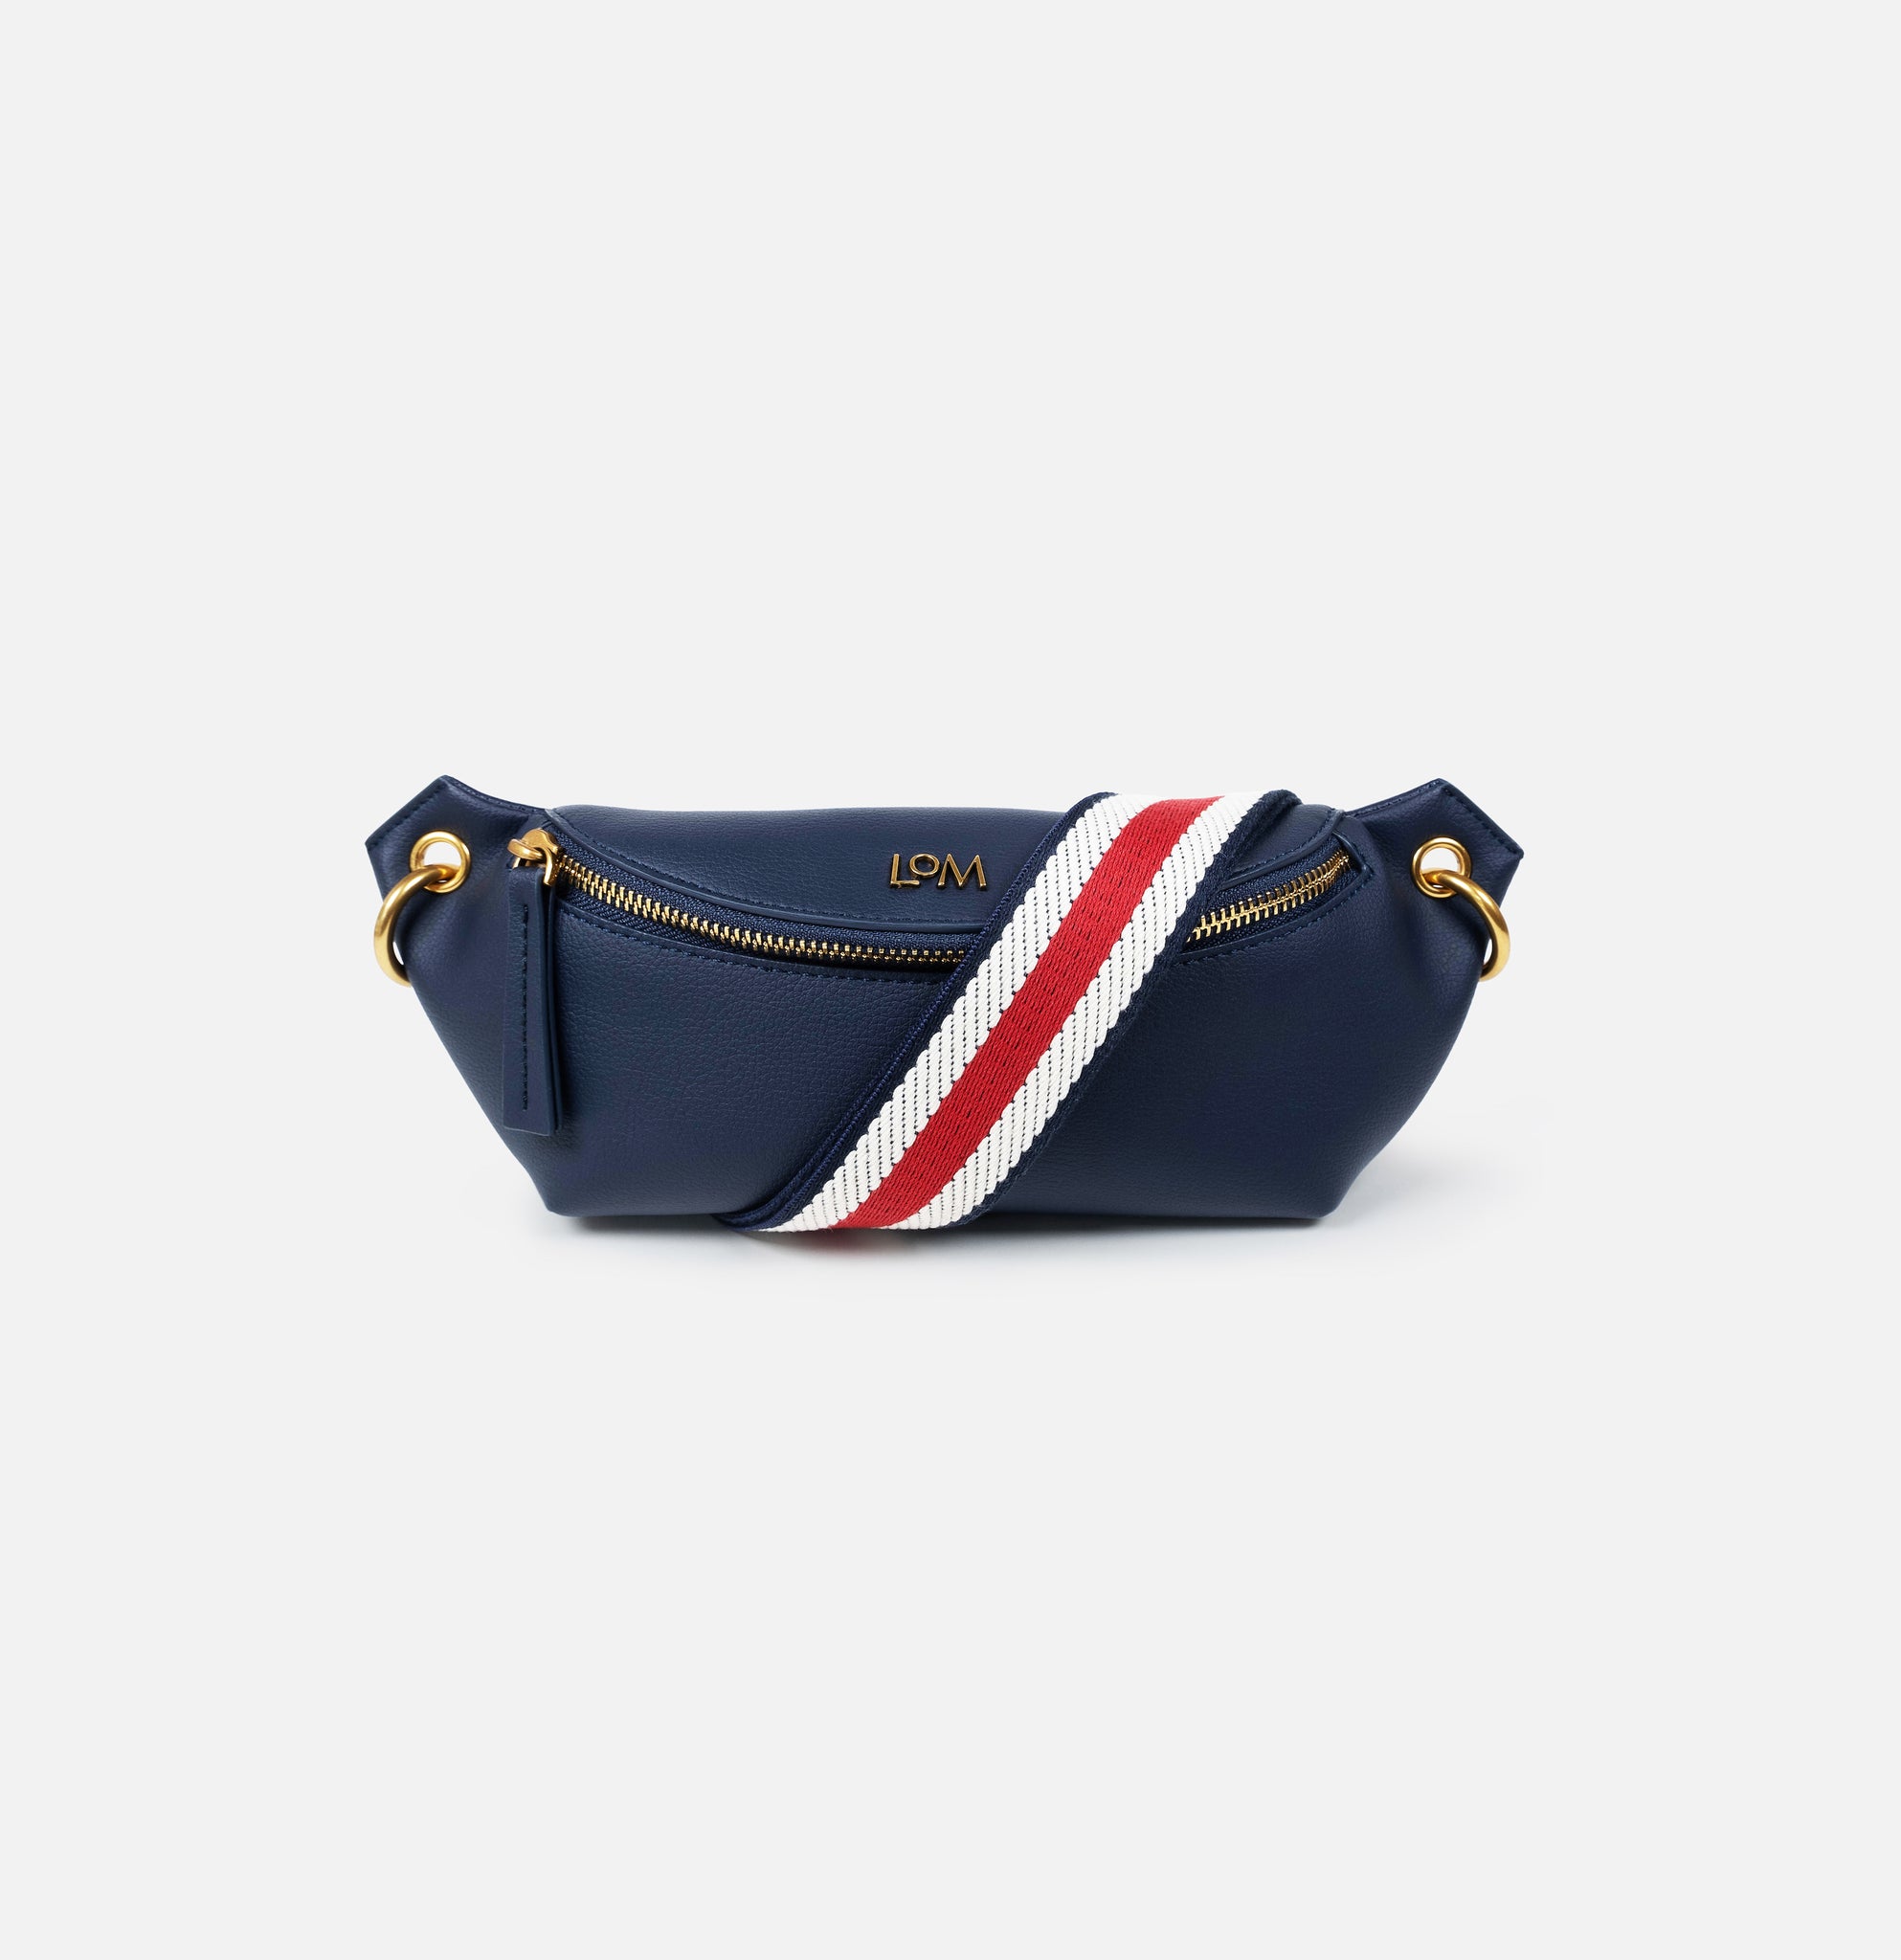 LOM Australia - Steall Belt Bag in Navy vegan cactus leather with Chamaeleon Red, White & Navy cotton webbing strap.